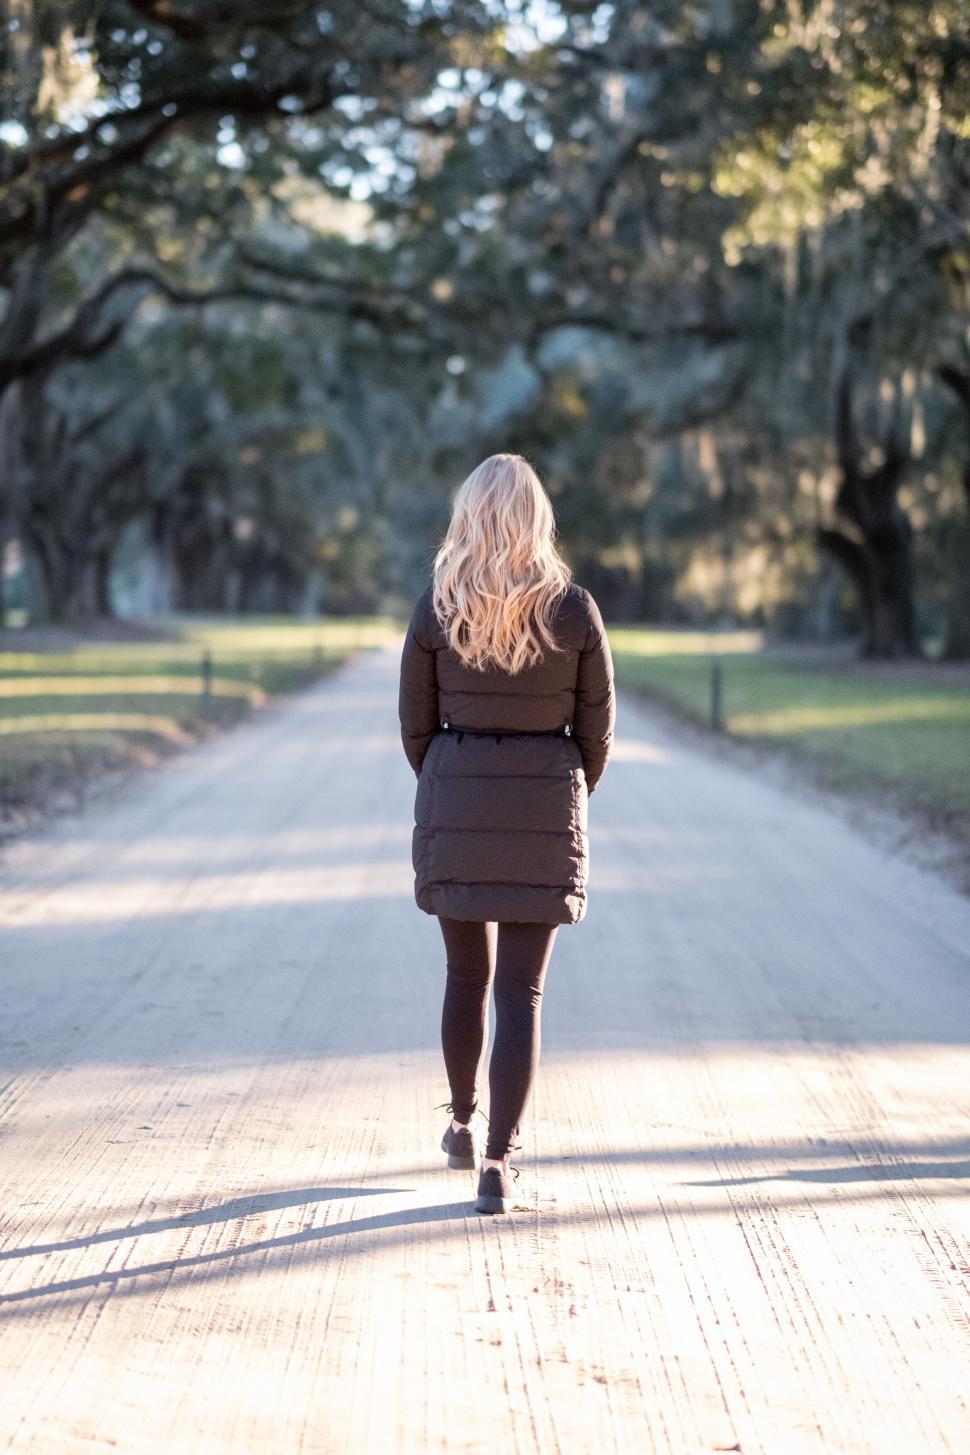 Free Image of Woman walking alone on a country road 